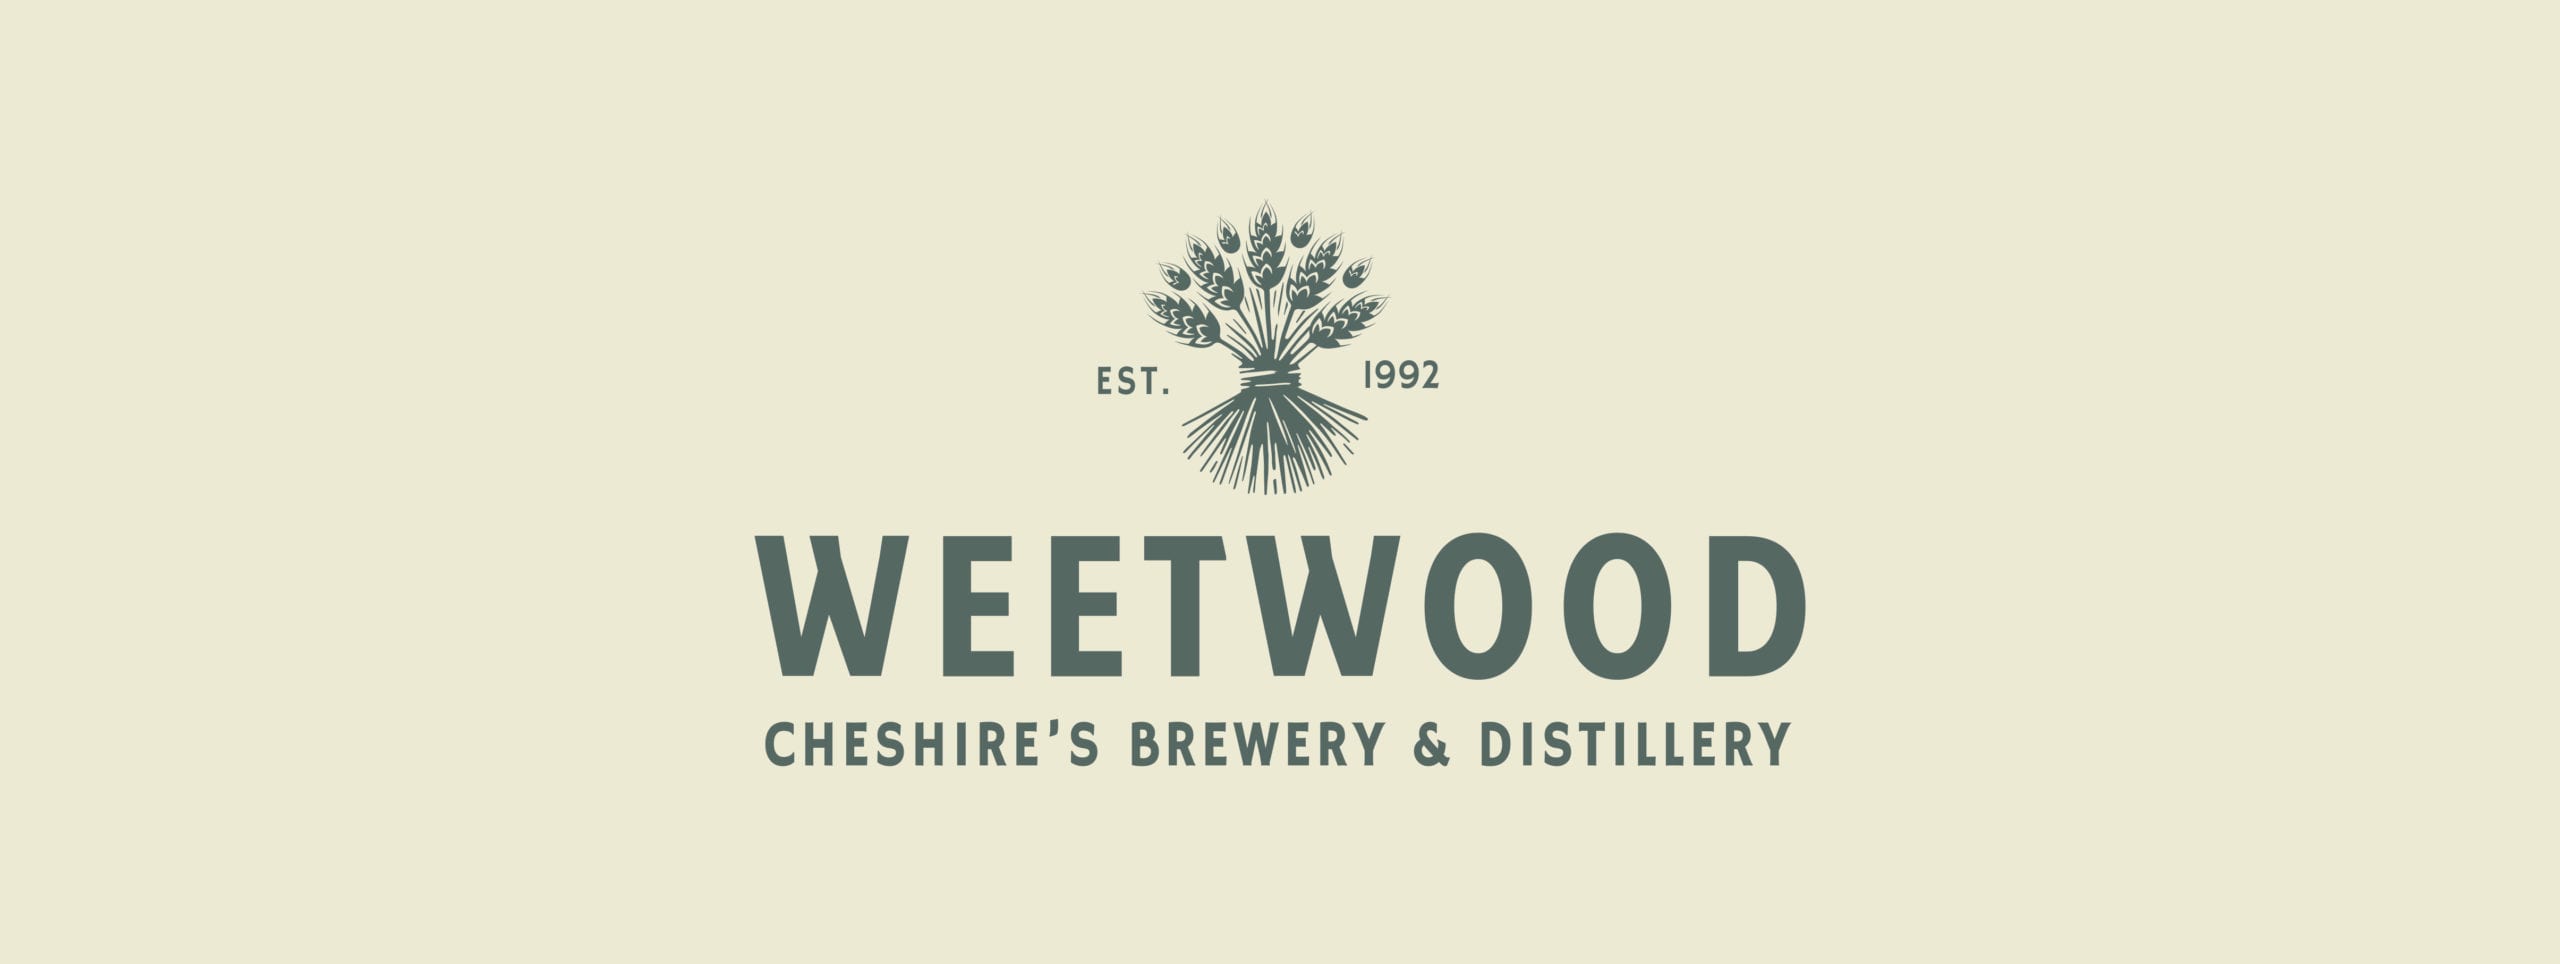 Weetwood brewery and distillery branding logo by Kingdom & Sparrow